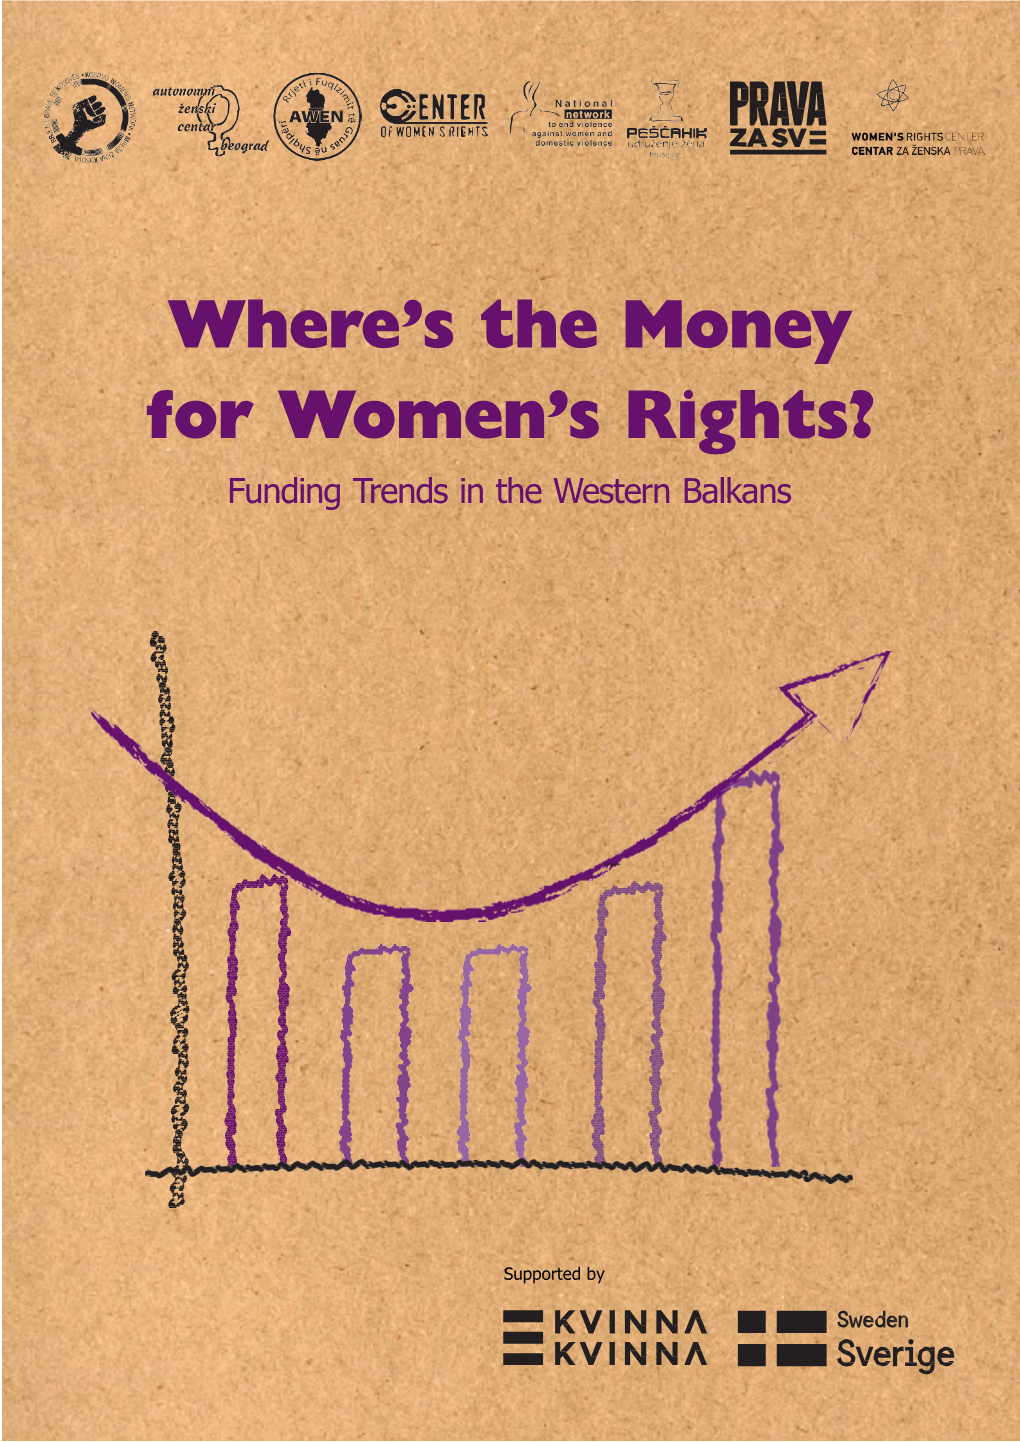 Where's the Money for Women's Rights?